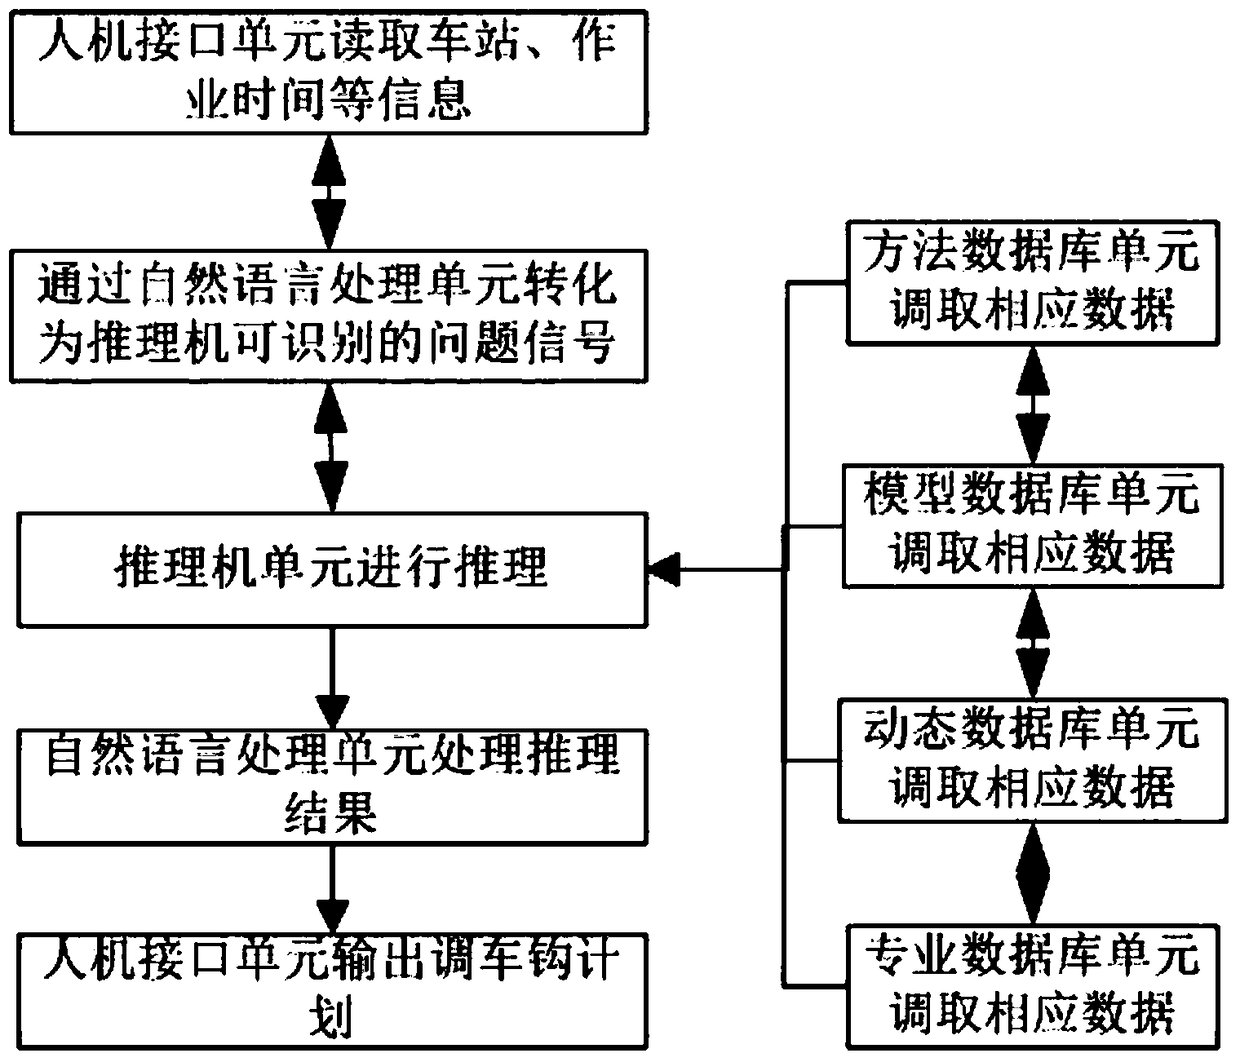 A method and system for automatically generating an enterprise railway shunting coupler plan